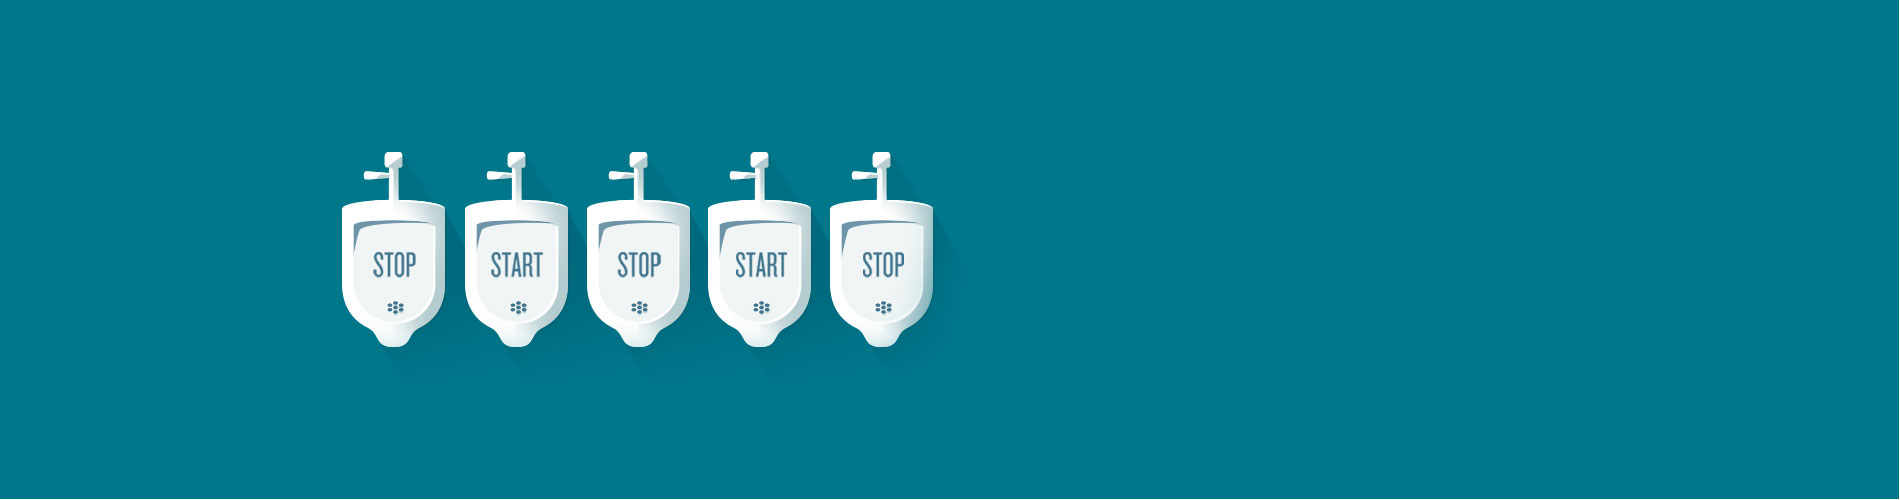 Illustration of urinals with alternating text of "Start" and "Stop"